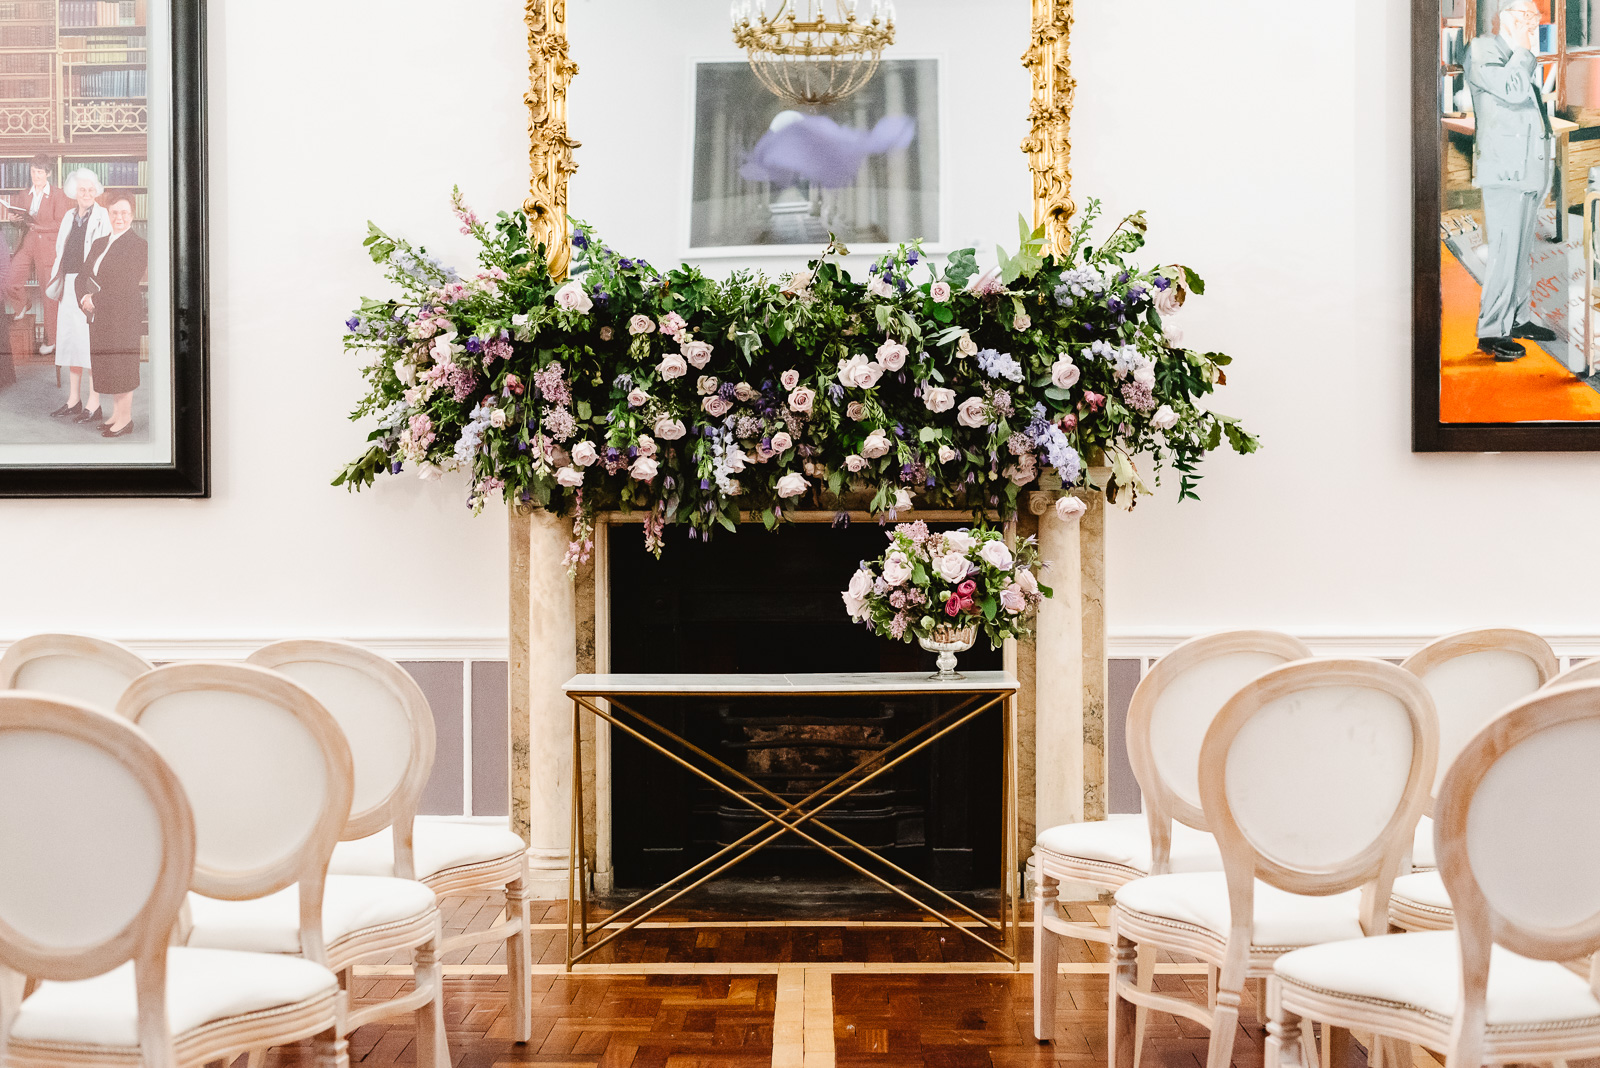 Wedding ceremony setup in front of a fireplace